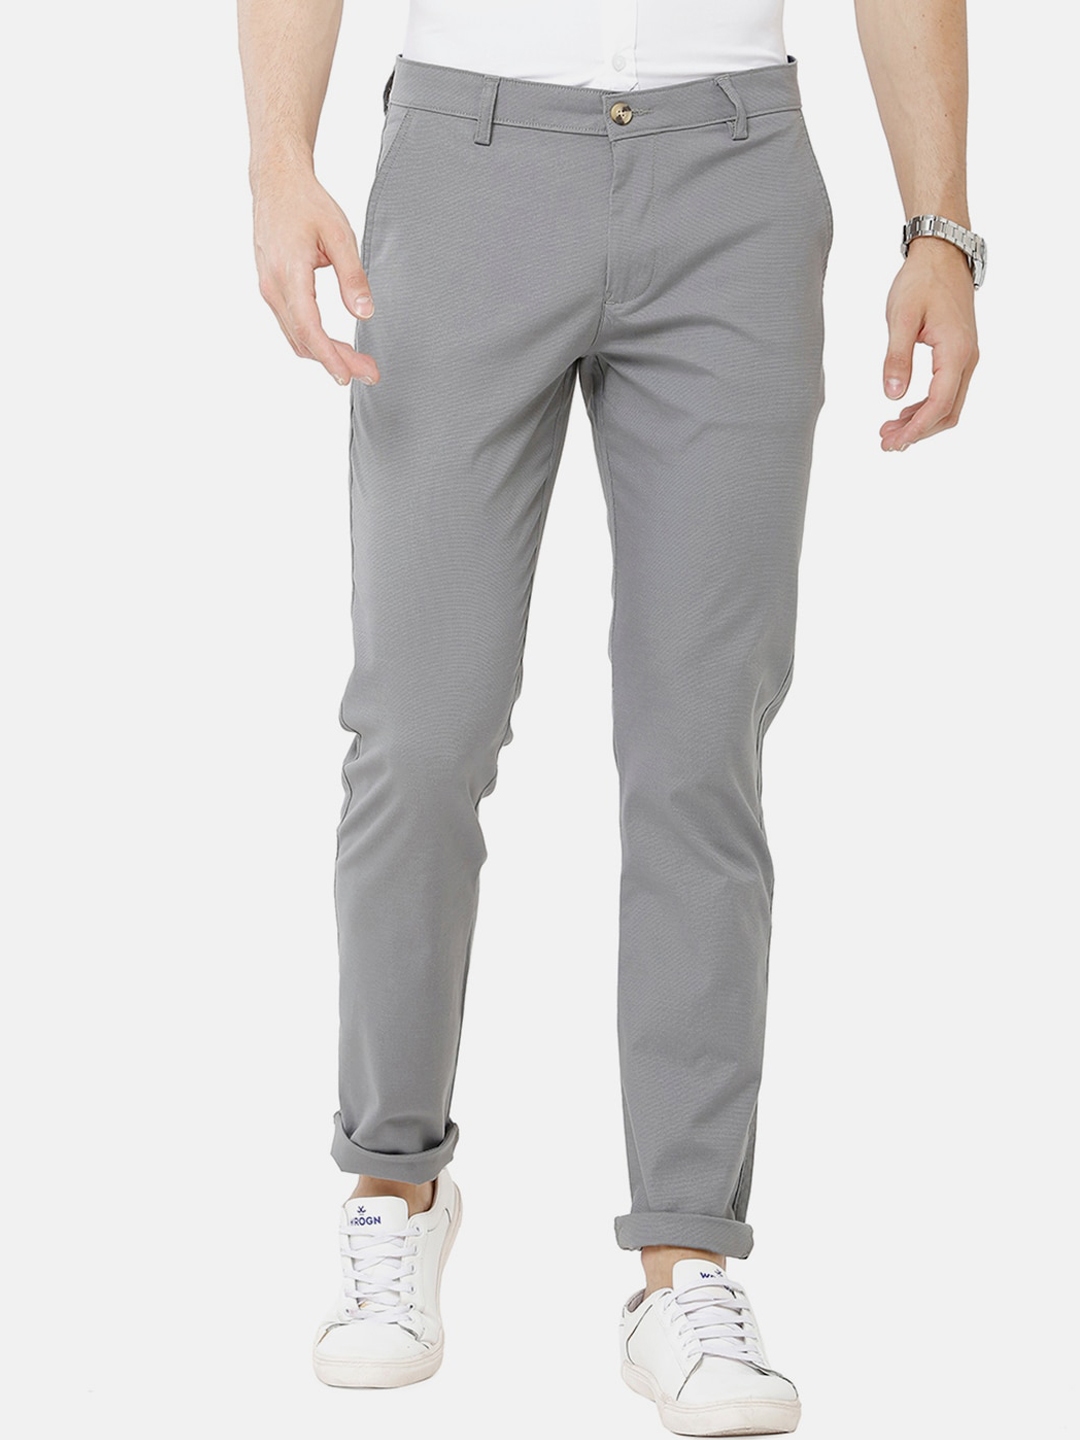 Buy Classic Polo Men Grey Chinos Trousers - Trousers for Men 18084736 ...